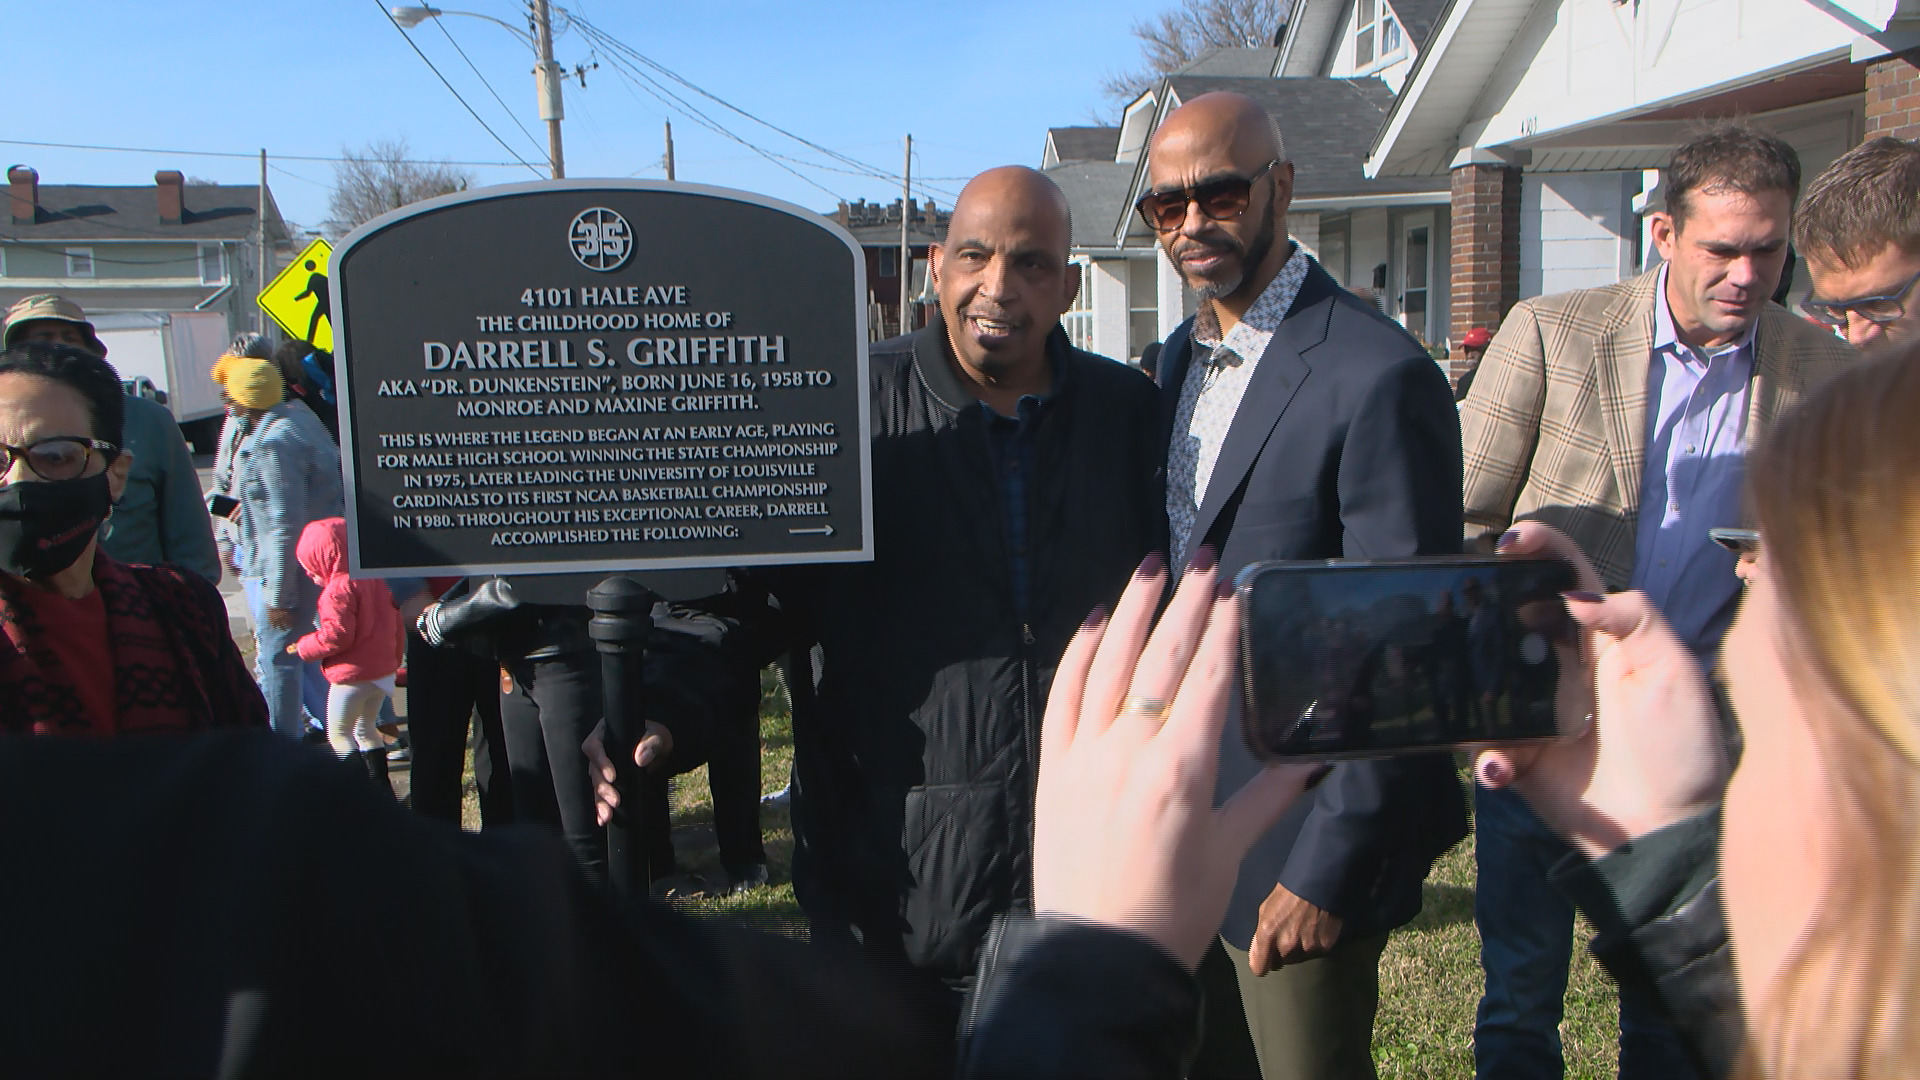 Darrell Griffith honored with street sign in Louisville